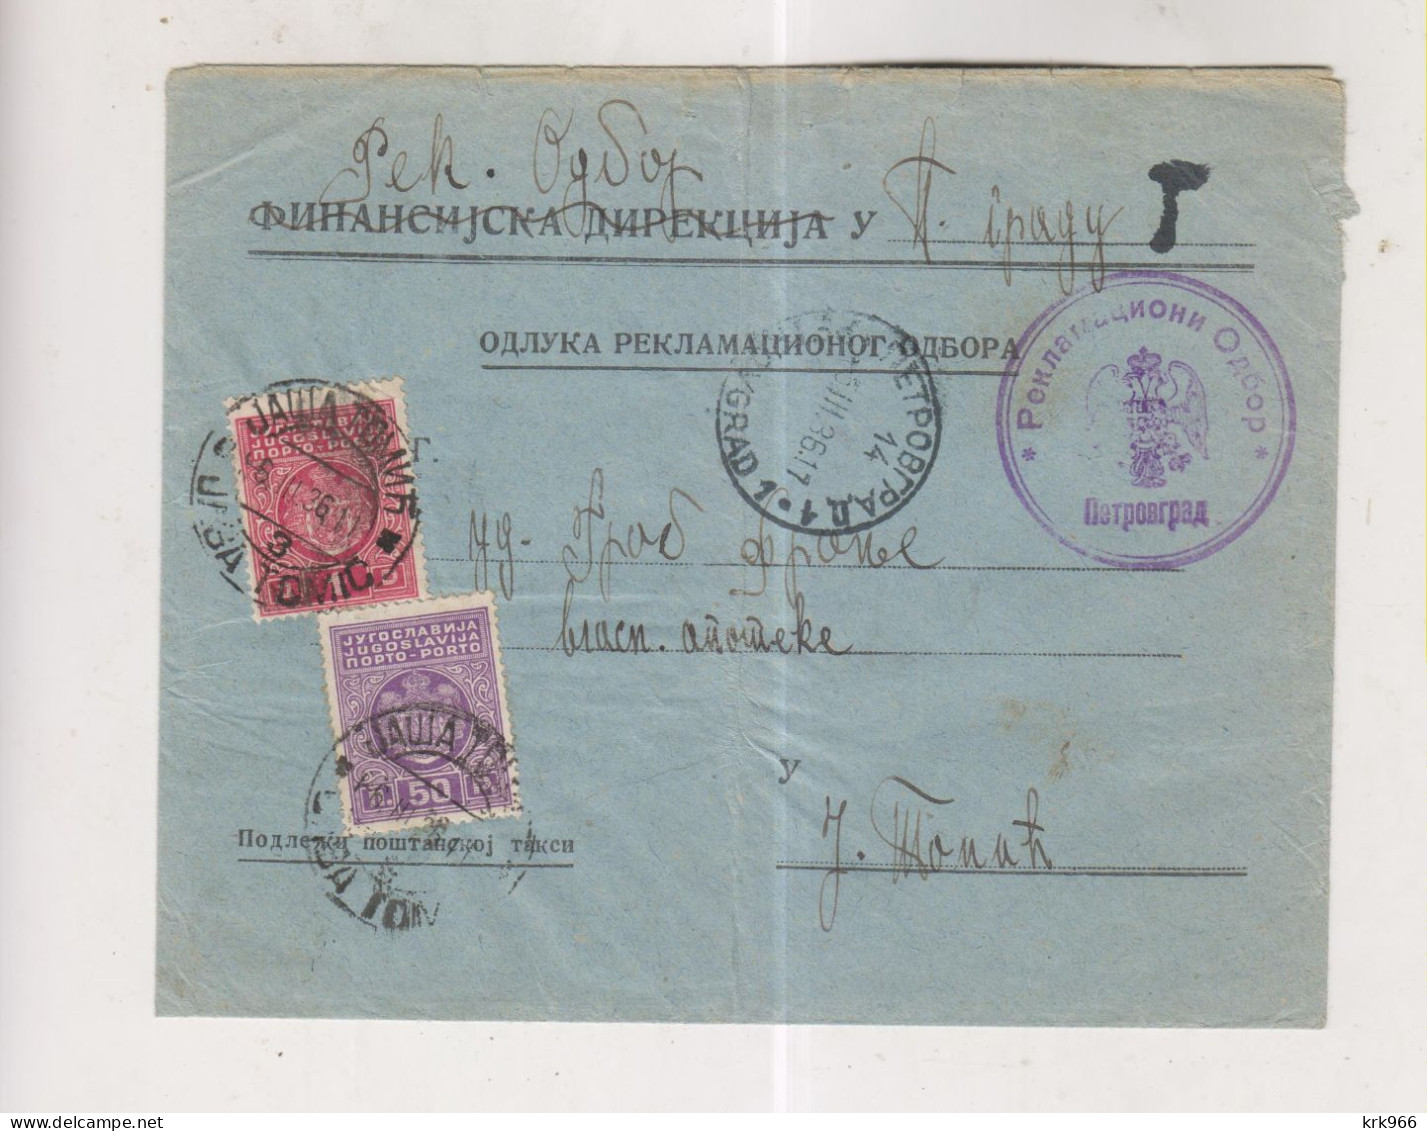 YUGOSLAVIA PETROVGRAD 1936 Nice Official Cover To JASA TOMIC Postage Due - Lettres & Documents